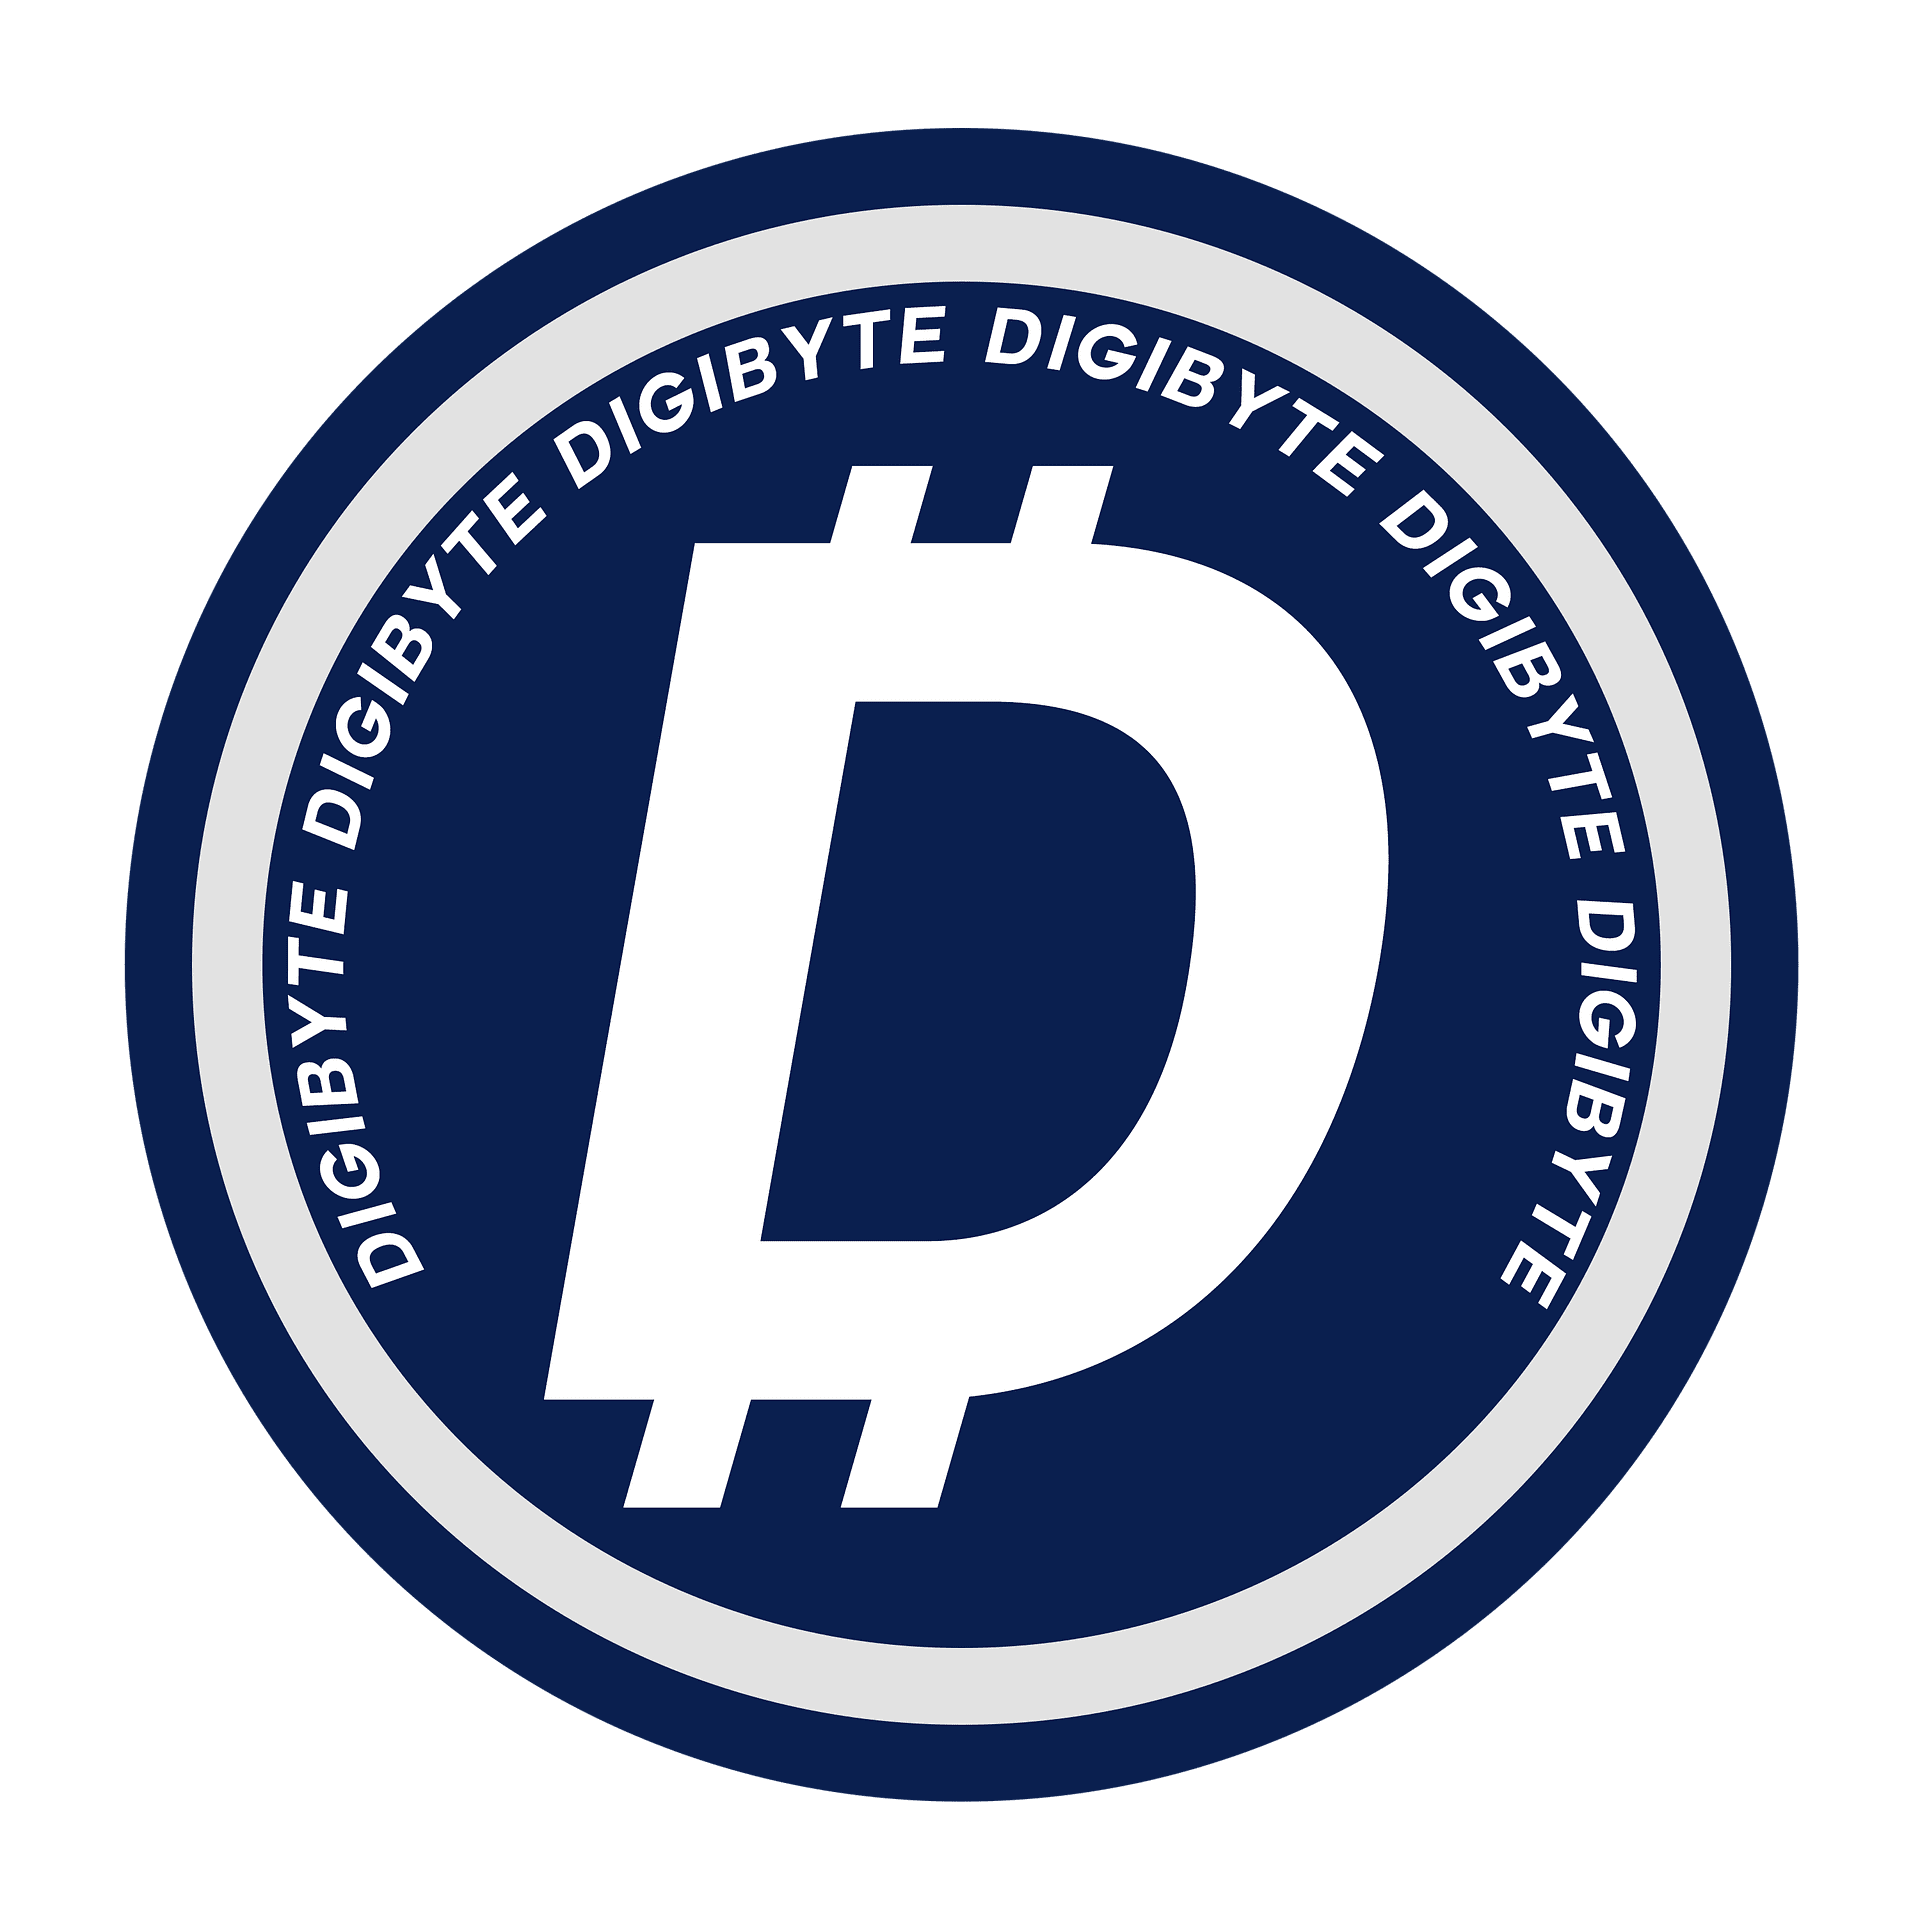 Digibyte is a cryptocurrency flying under the radar you need to know about